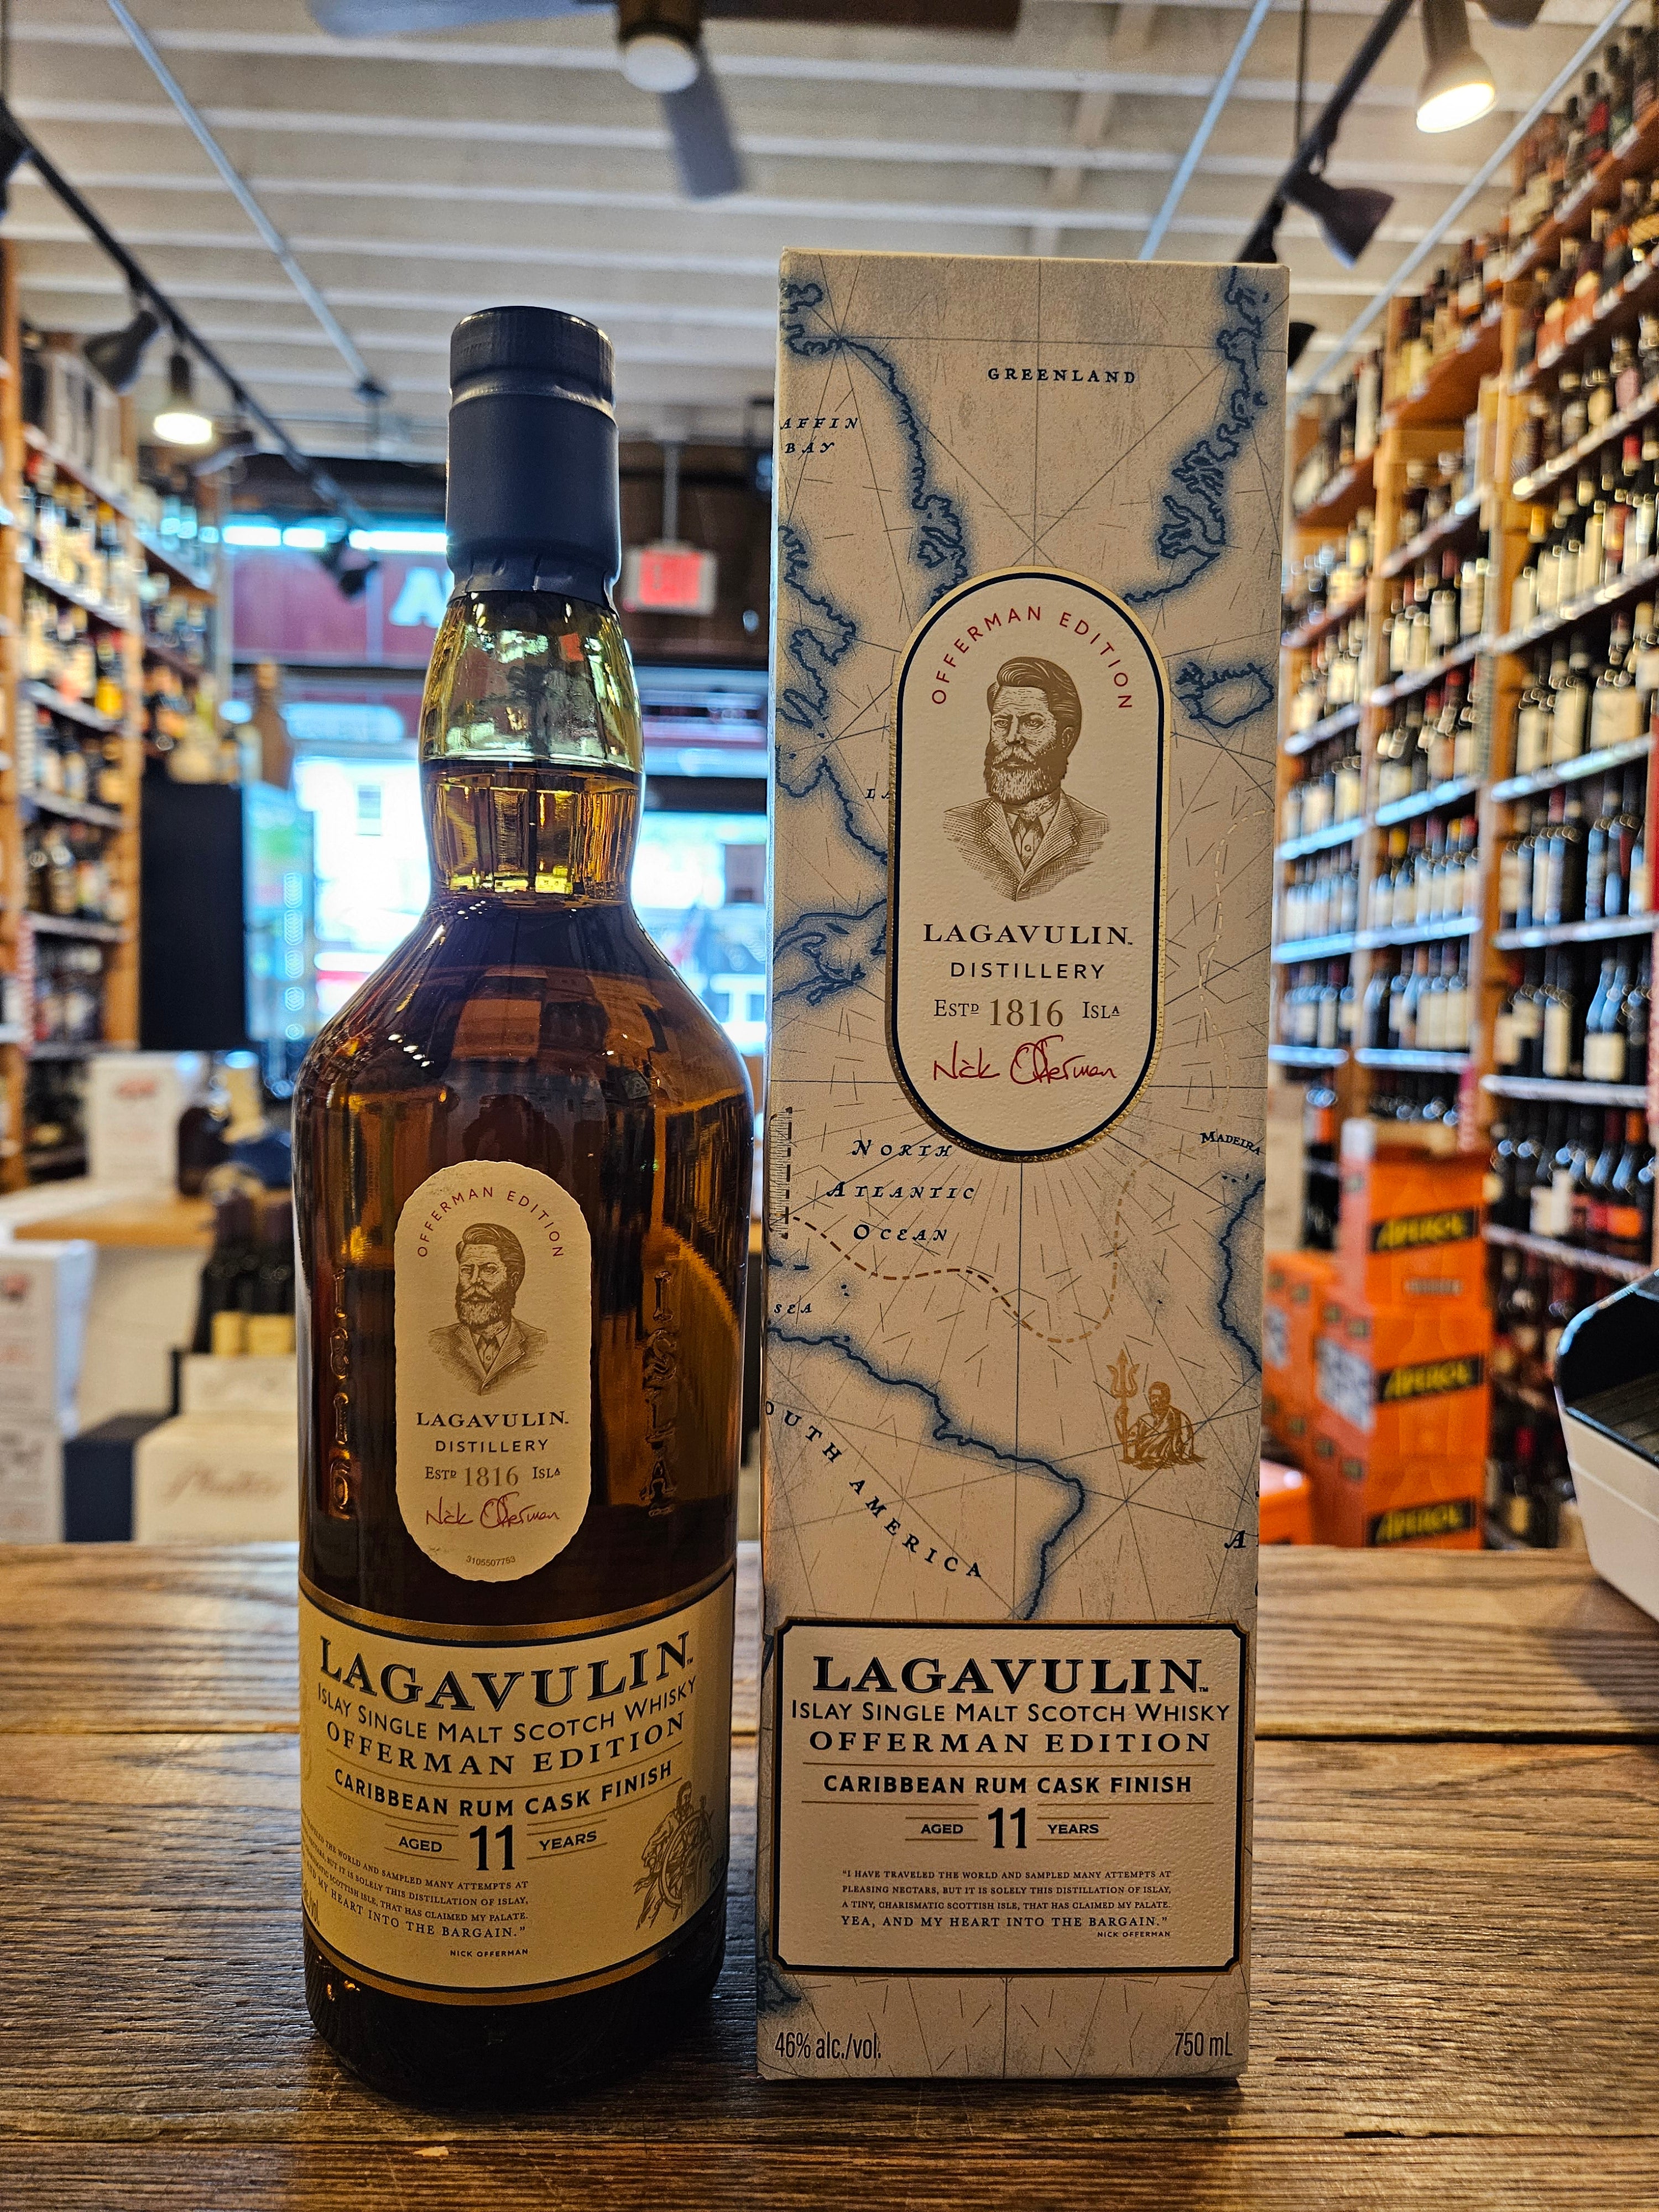 Lagavulin 11 Year Offerman Edition Caribbean Rum Cask Finish Single Malt Scotch Whisky a clear glass bottle with a beige label and a blue top next to a tall rectangular white box with an atlas on it.